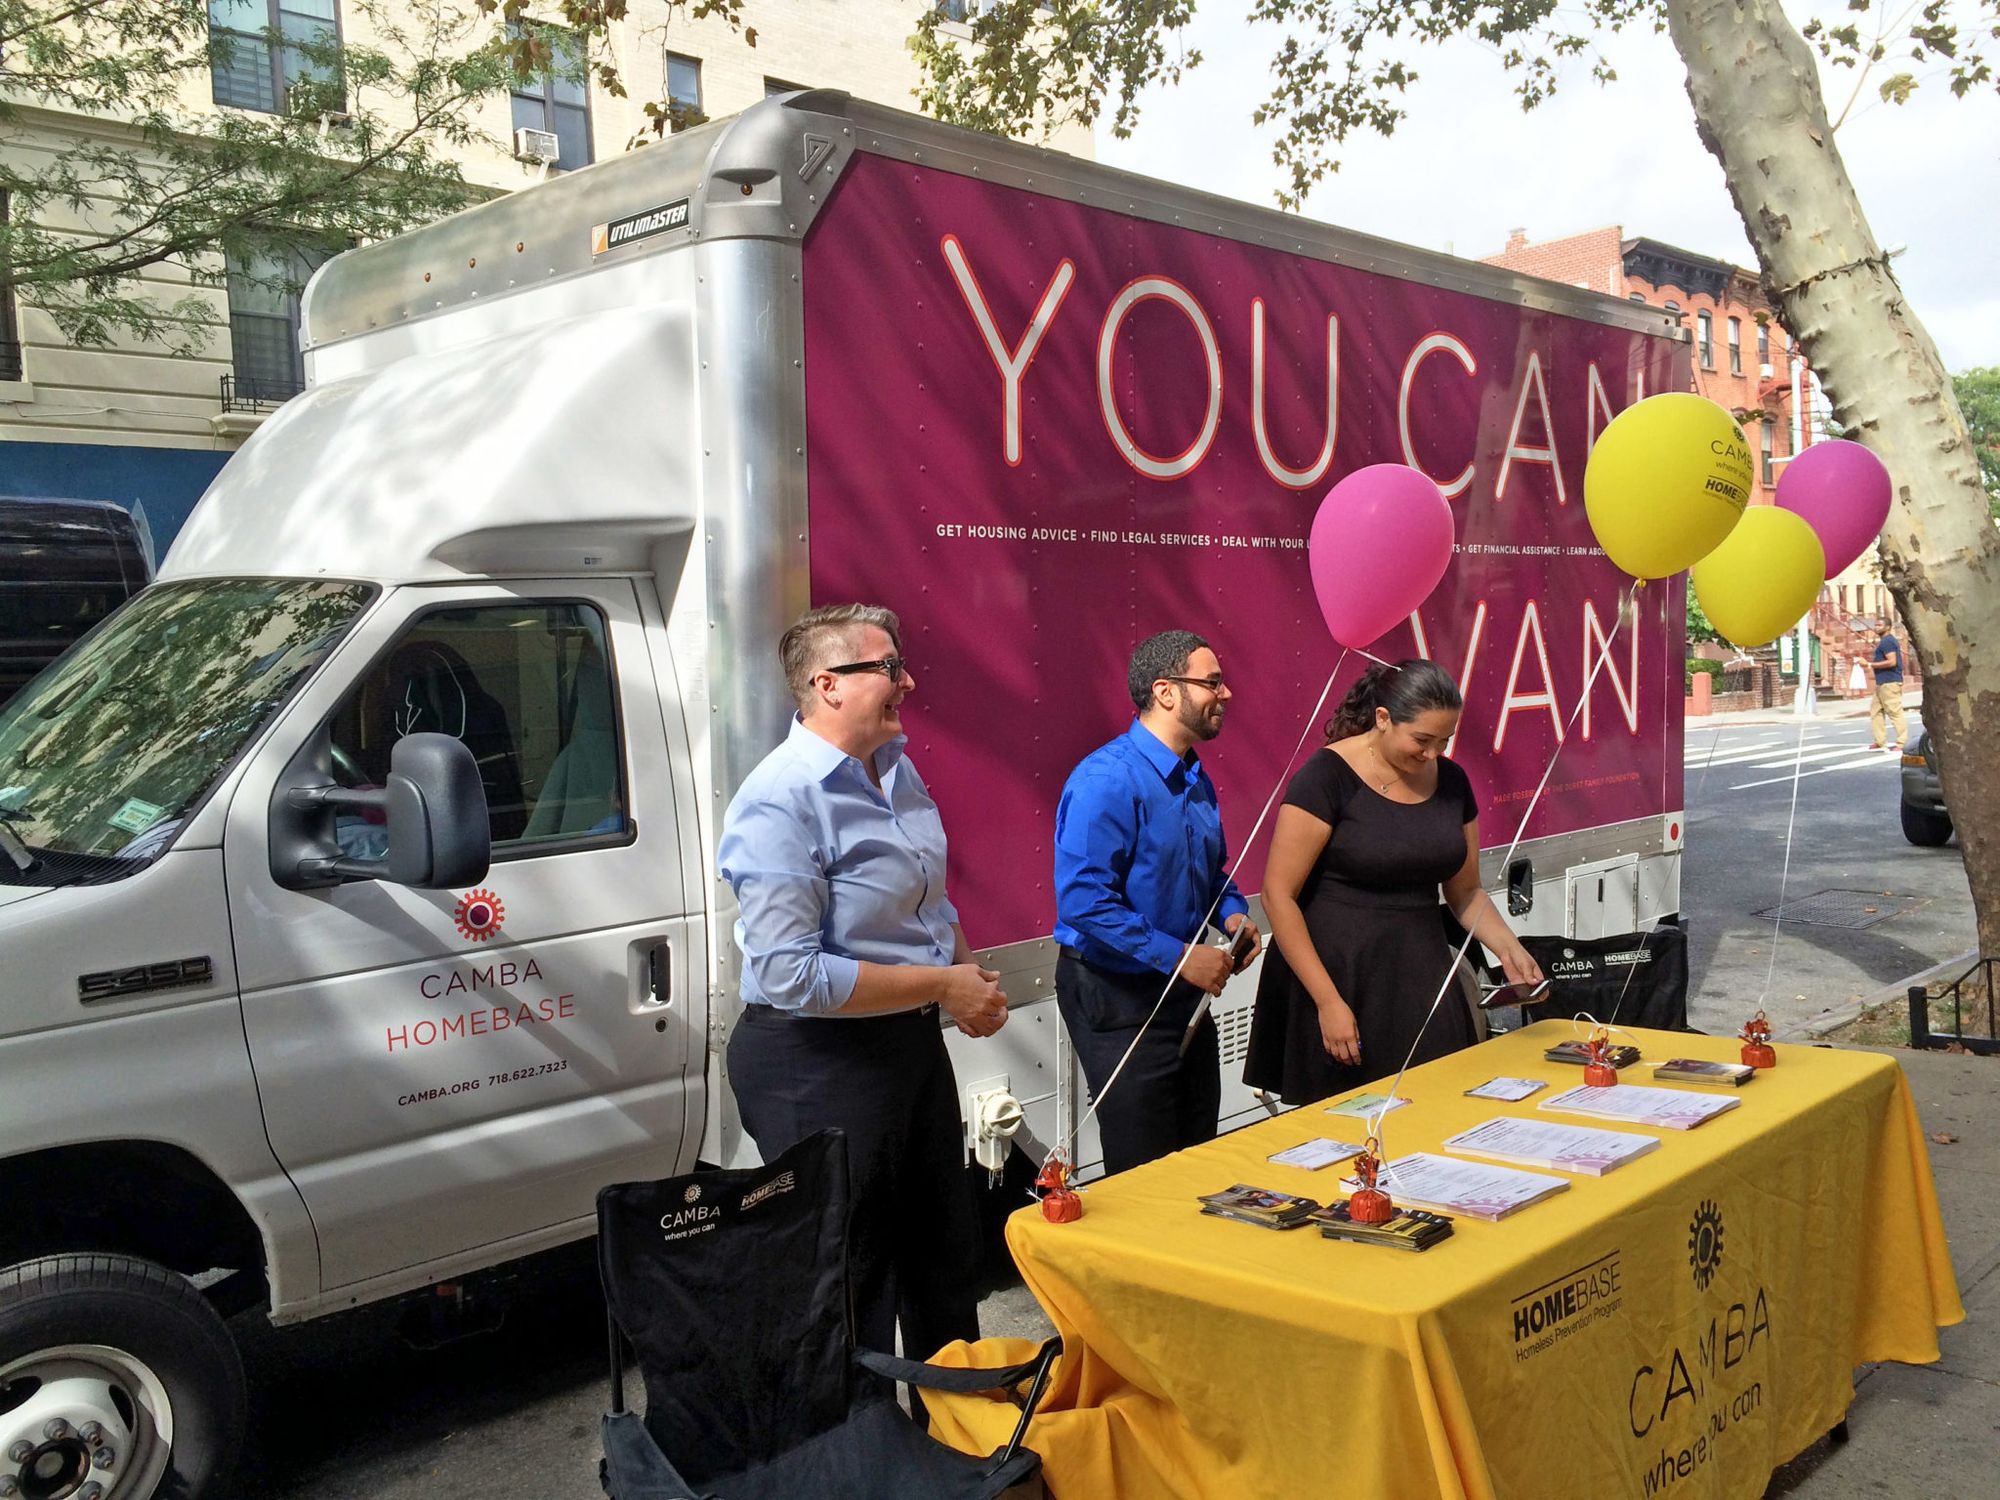 CAMBA Launches “You Can Van” To Reach Out To Areas Where Residents Risk Losing Homes